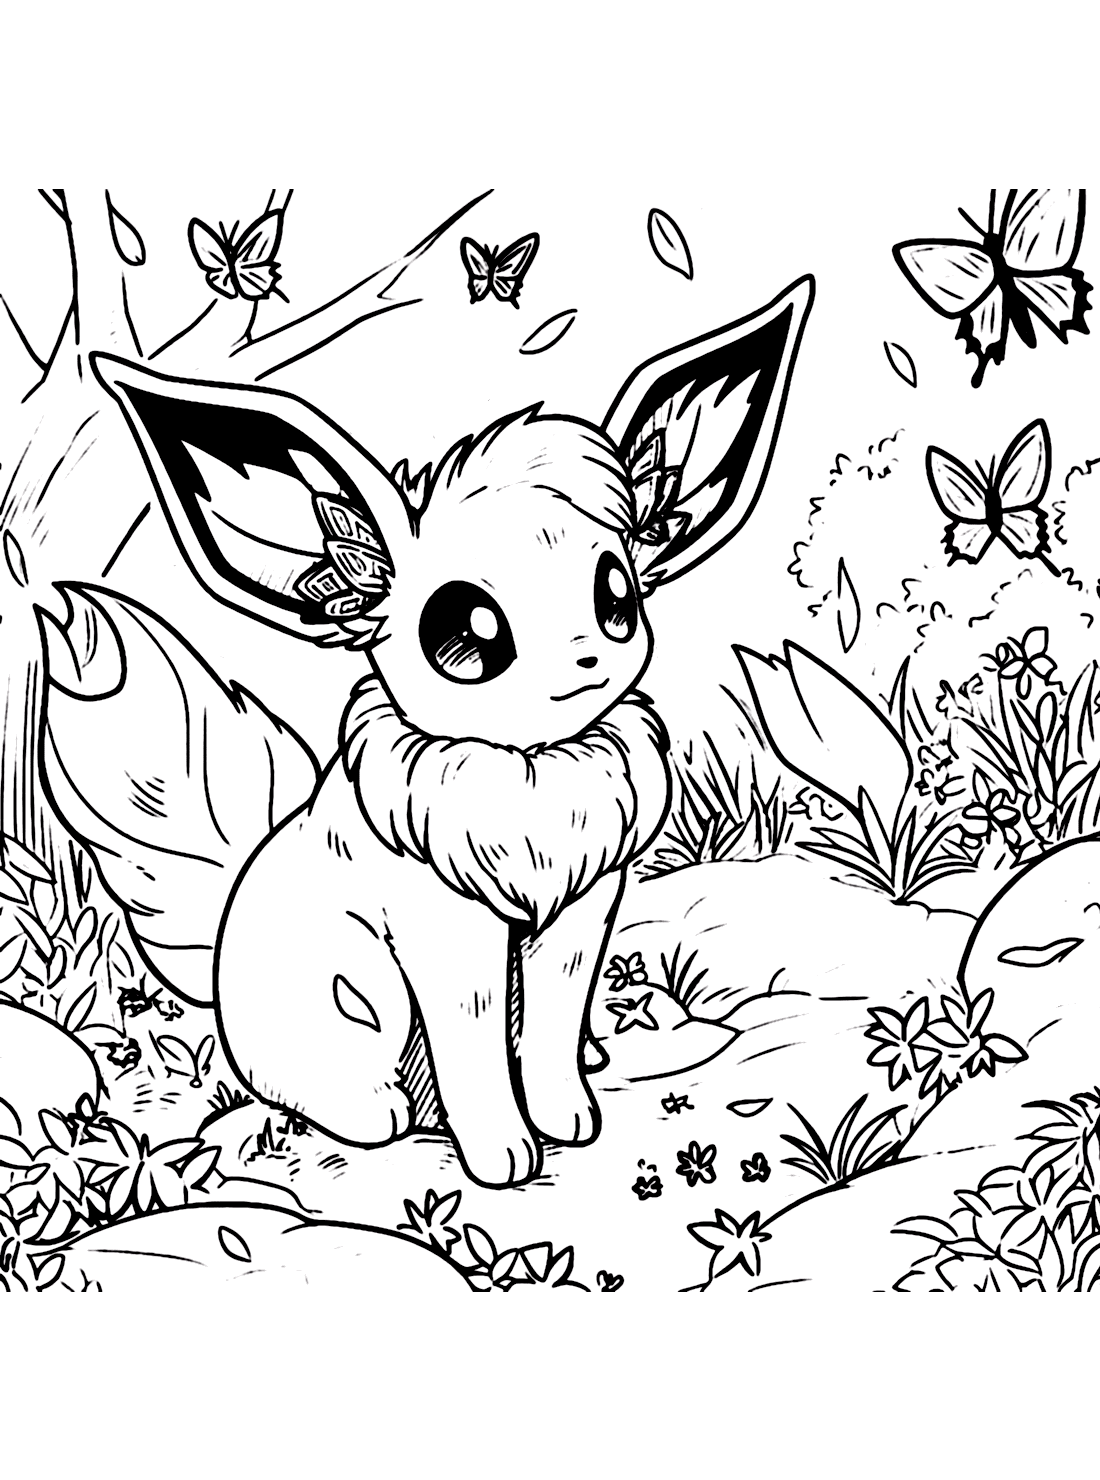 Leafeon Coloring Page Free